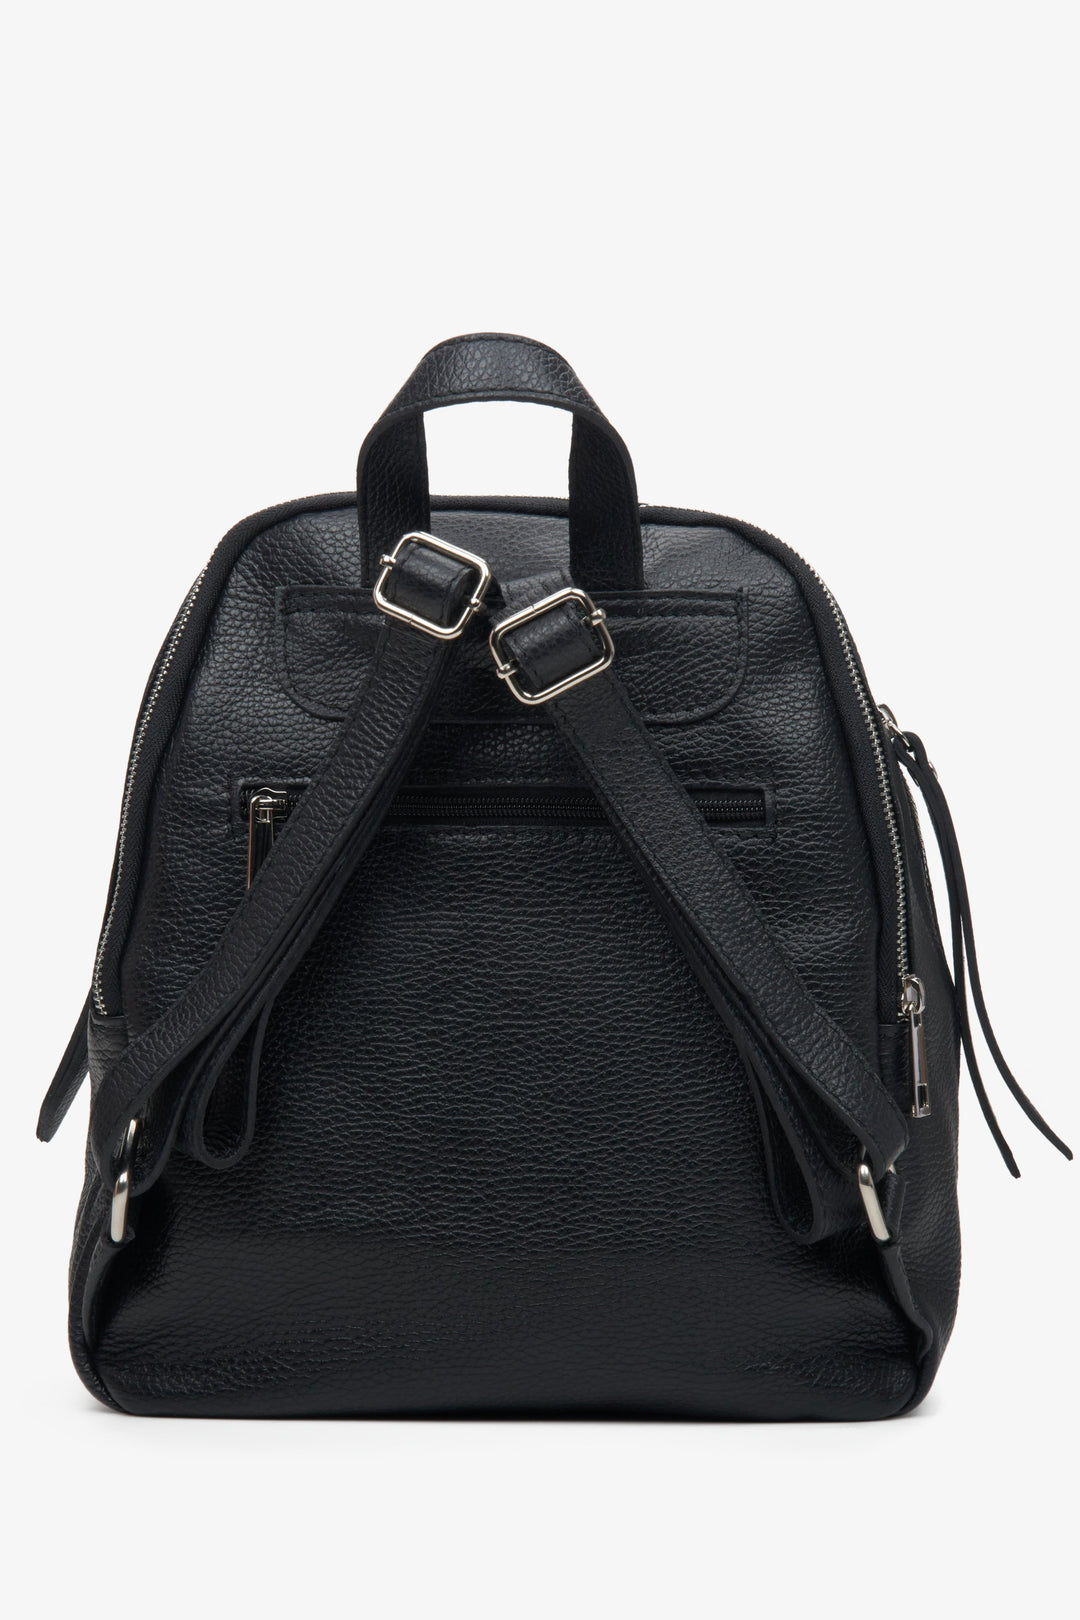 Women's black leather backpack with silver accents by Estro - reverse.